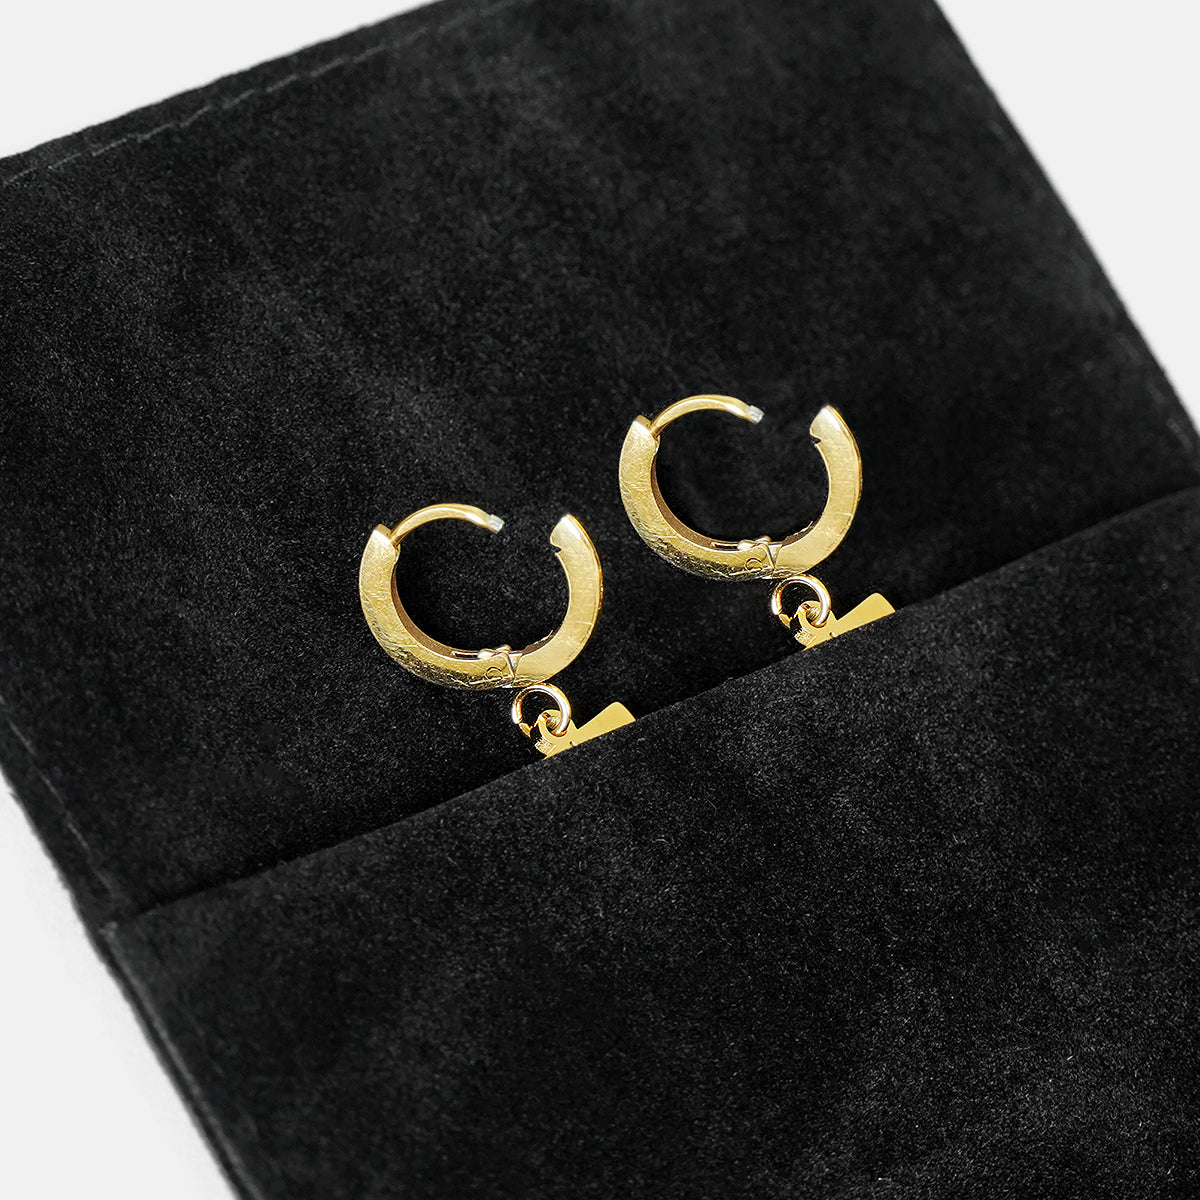 20 Number Earring - Gold Plated Stainless Steel